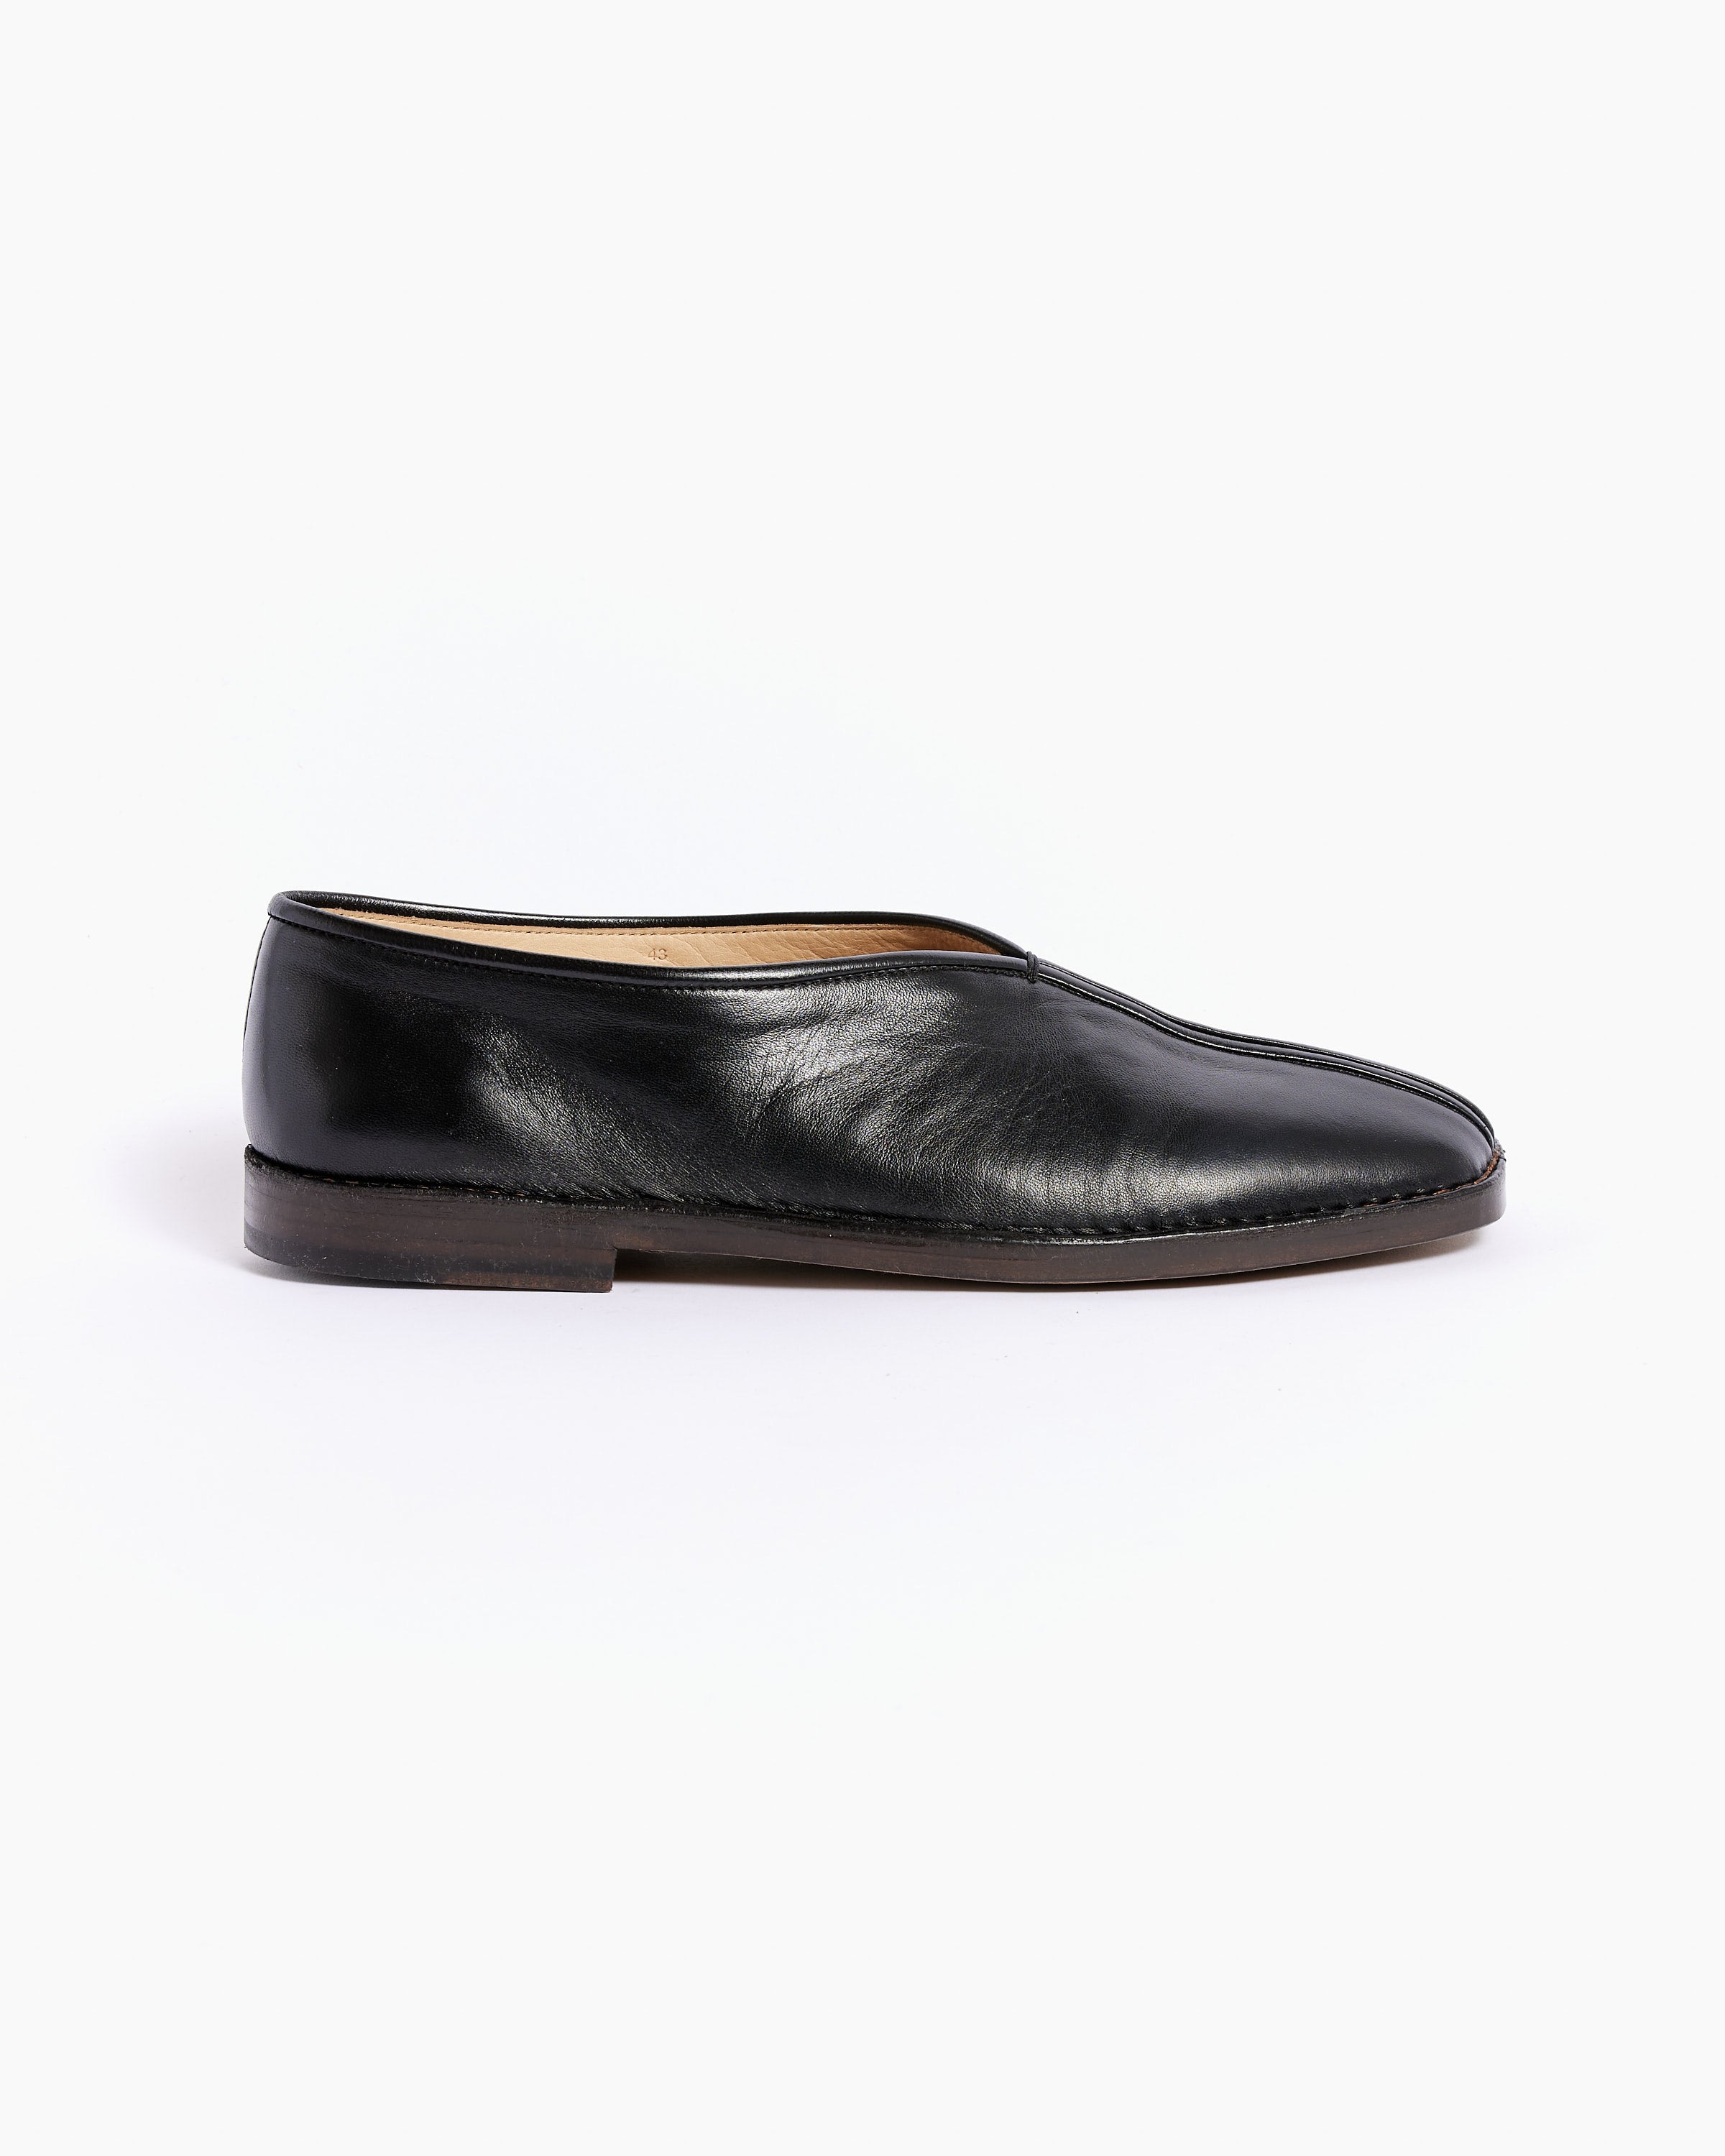 Mohawk General Store | Lemaire | Piped Slippers in Black